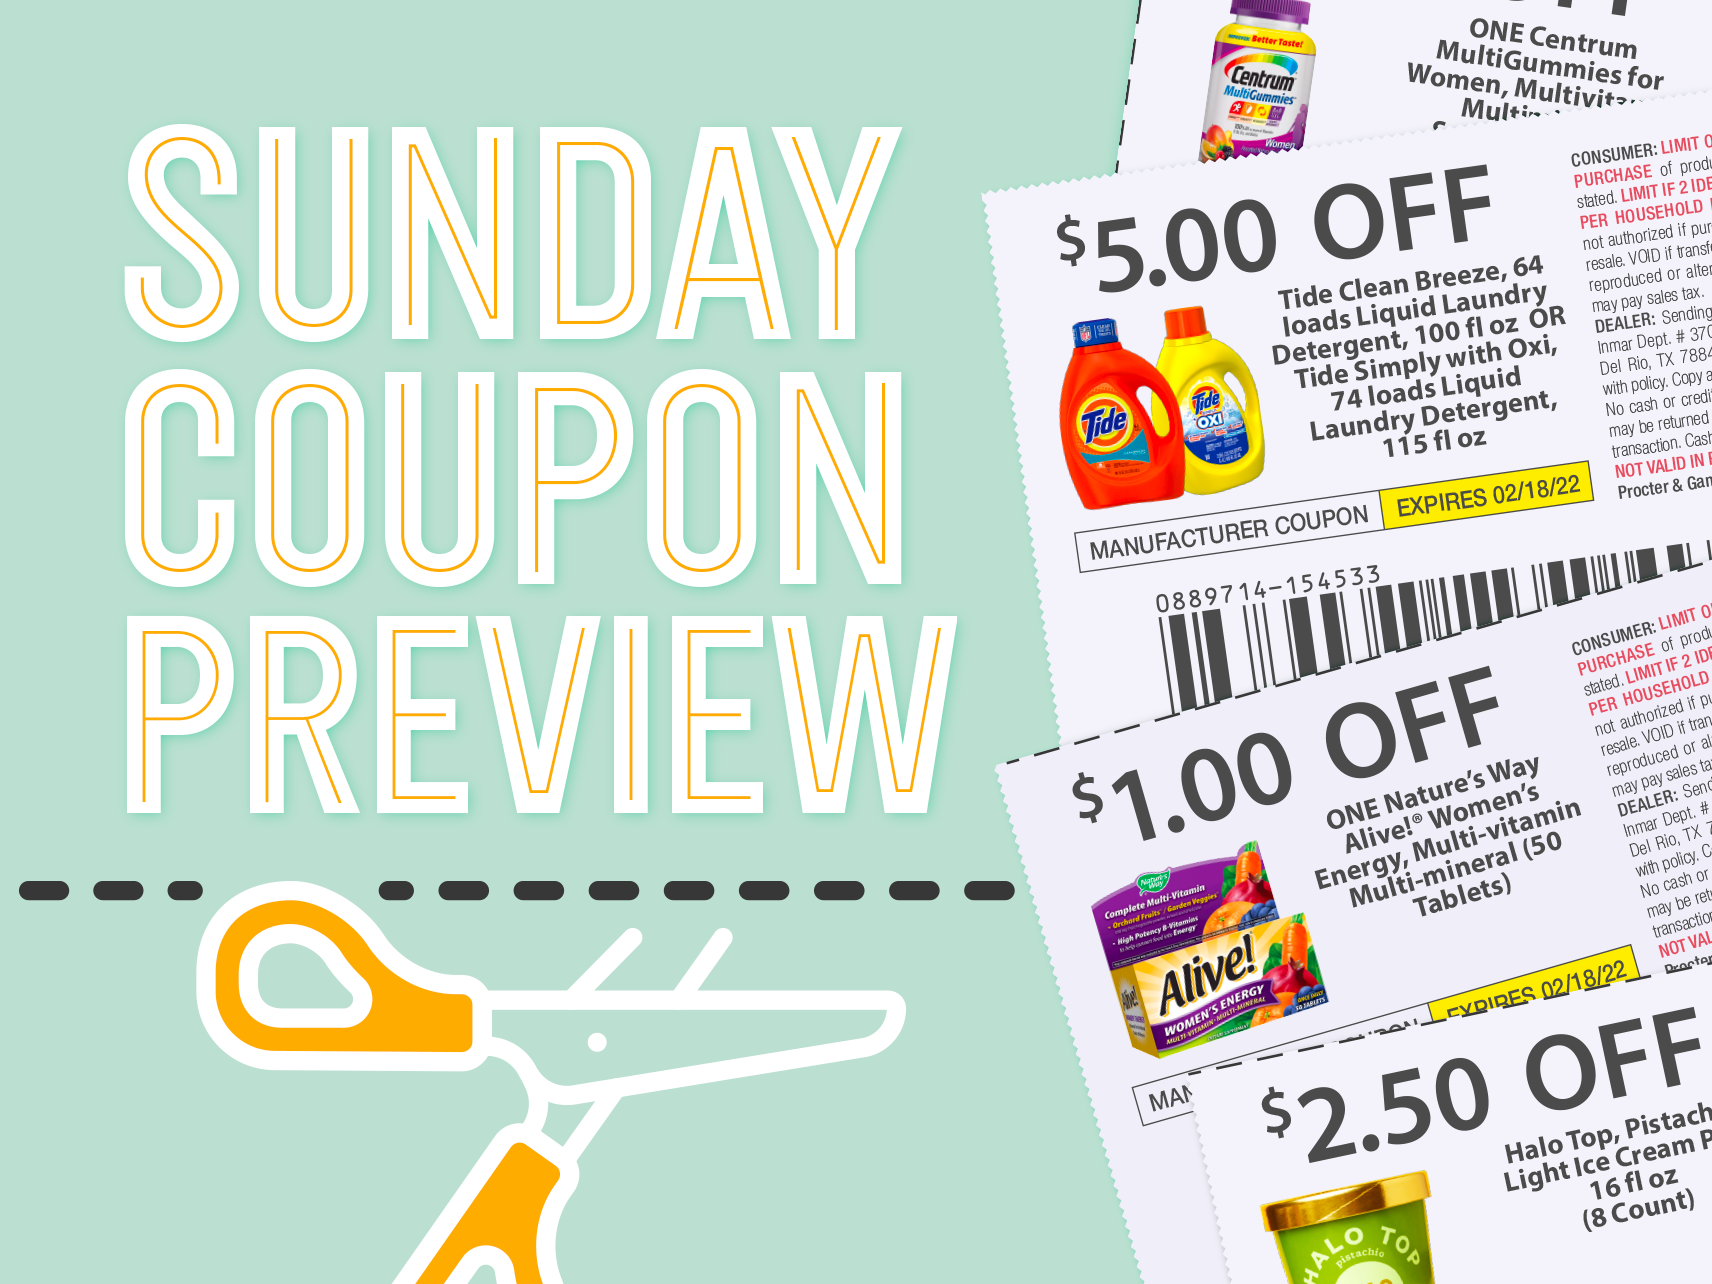 Sunday Coupon Preview For 3/26 – Two Inserts